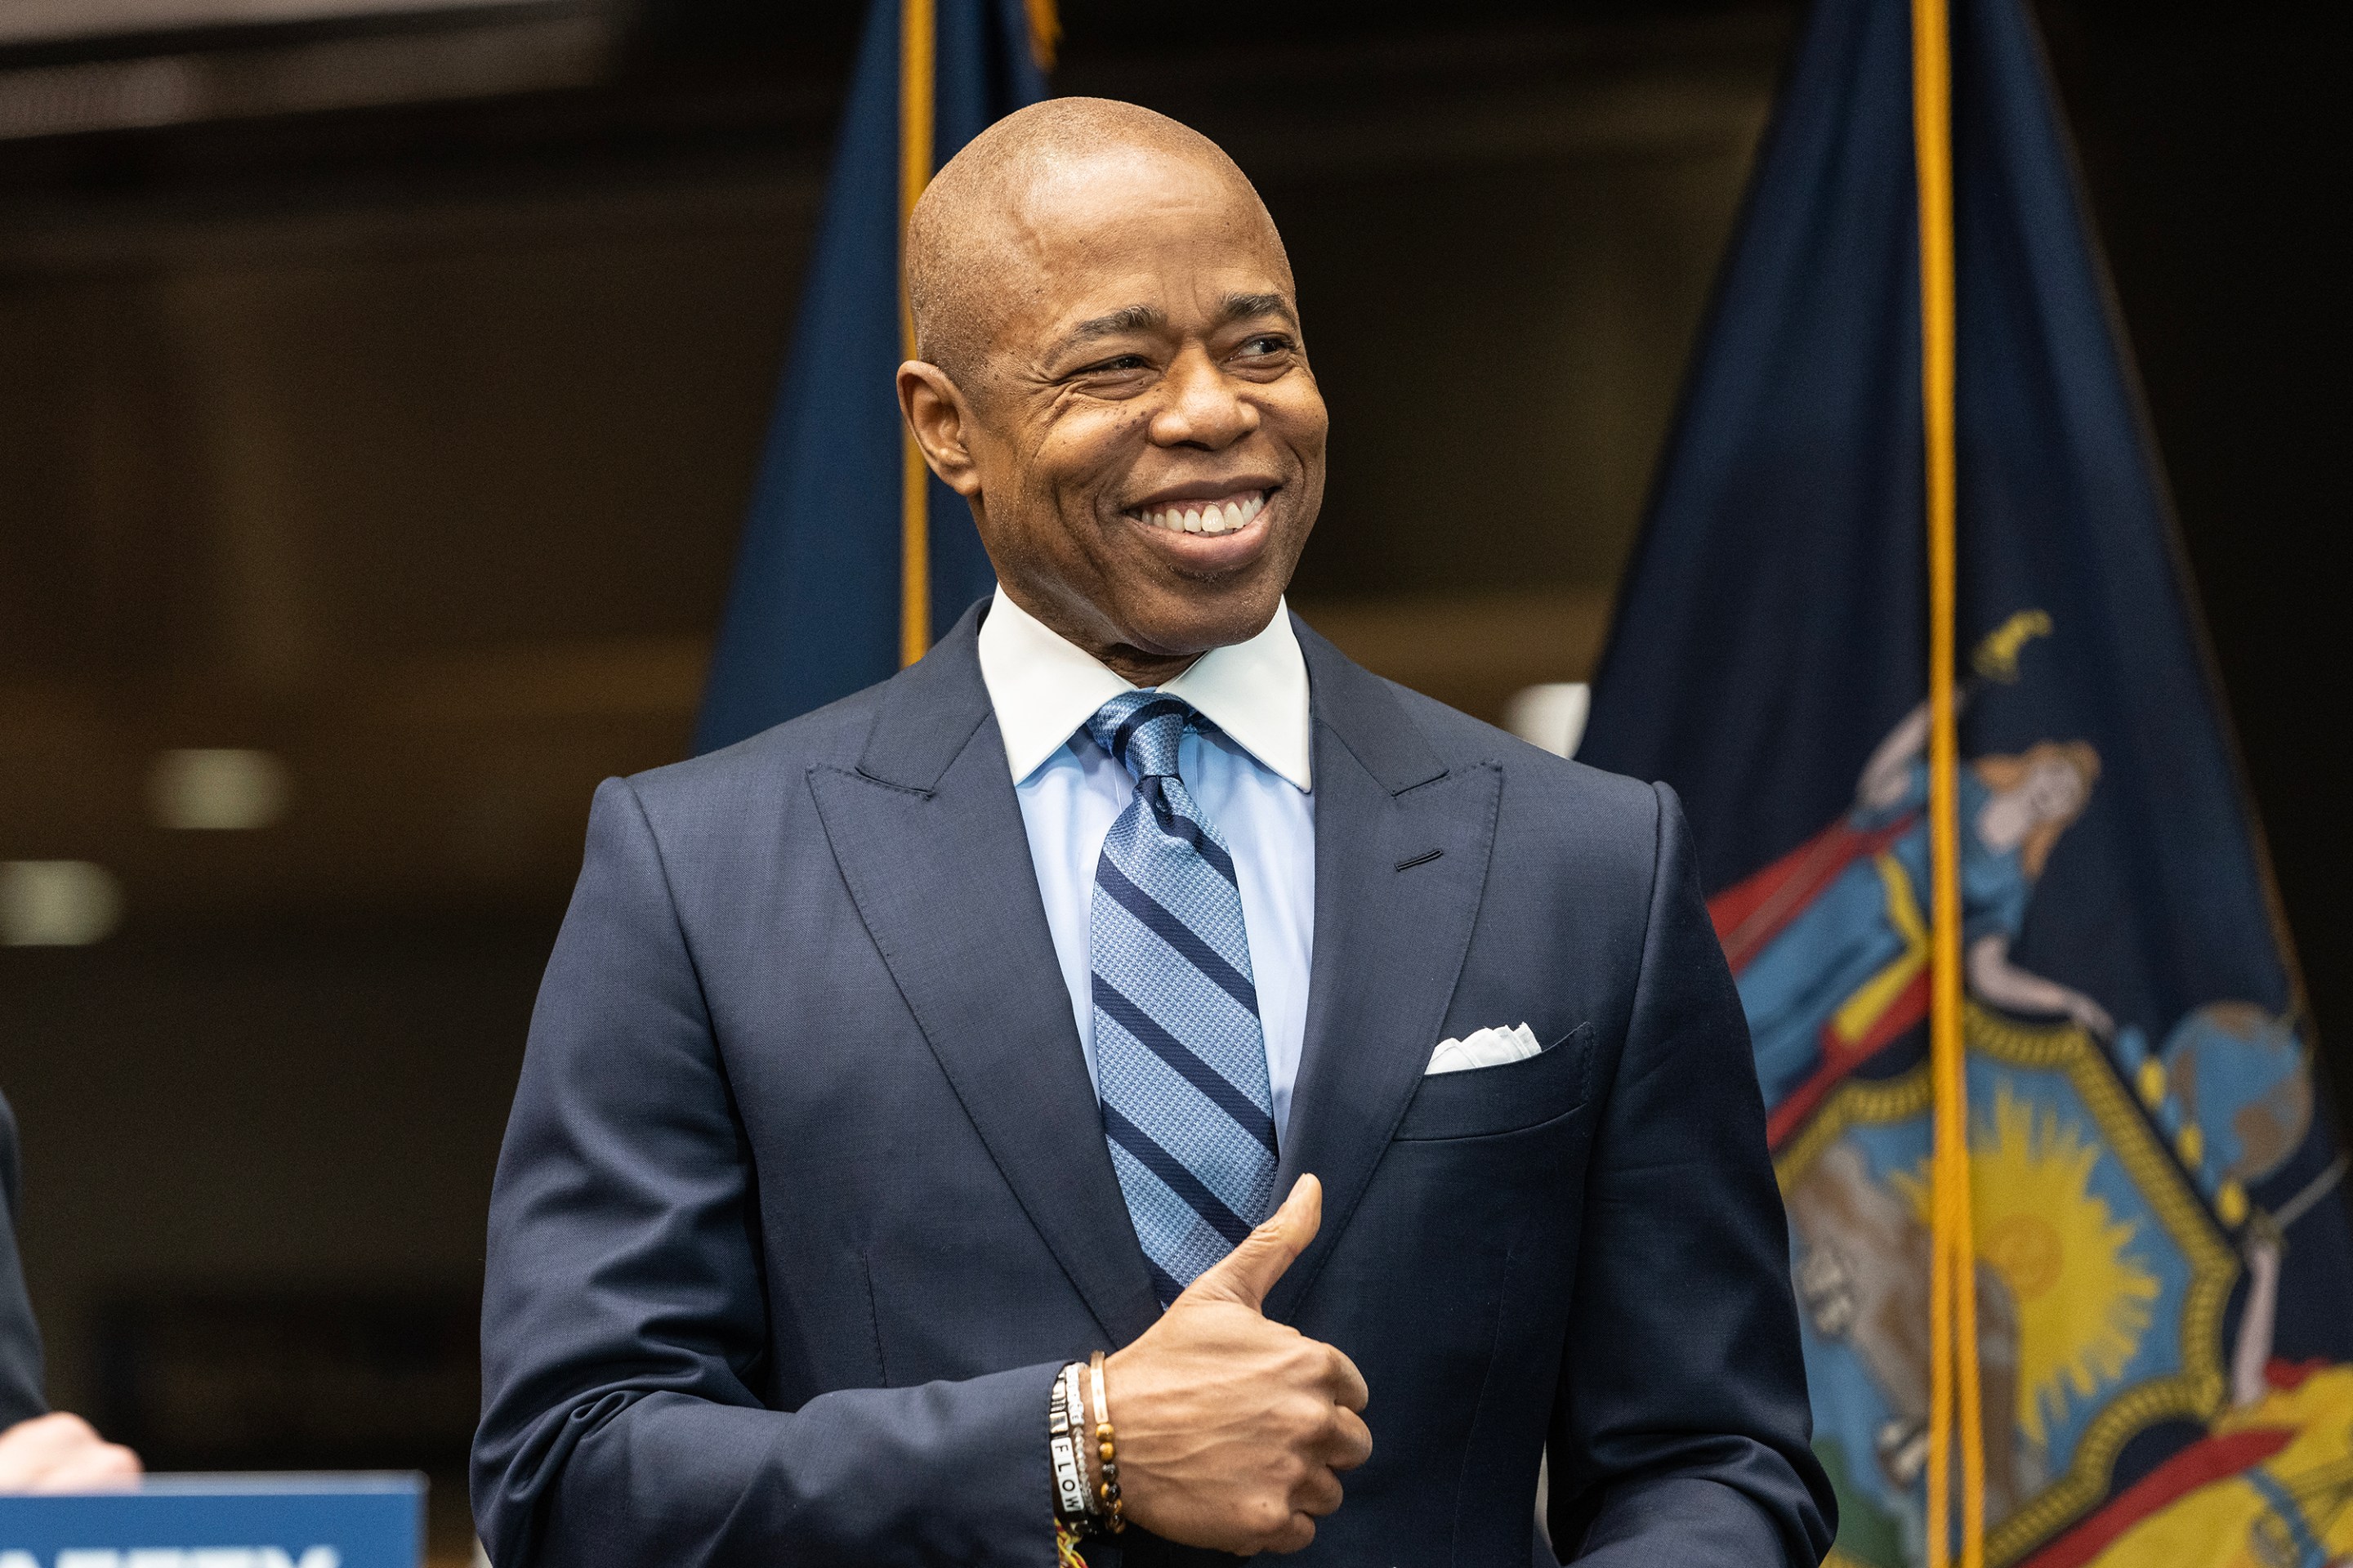 New York City Mayor Eric Adams smiles and gives a thumbs-up at an MTA event in January of 2023.